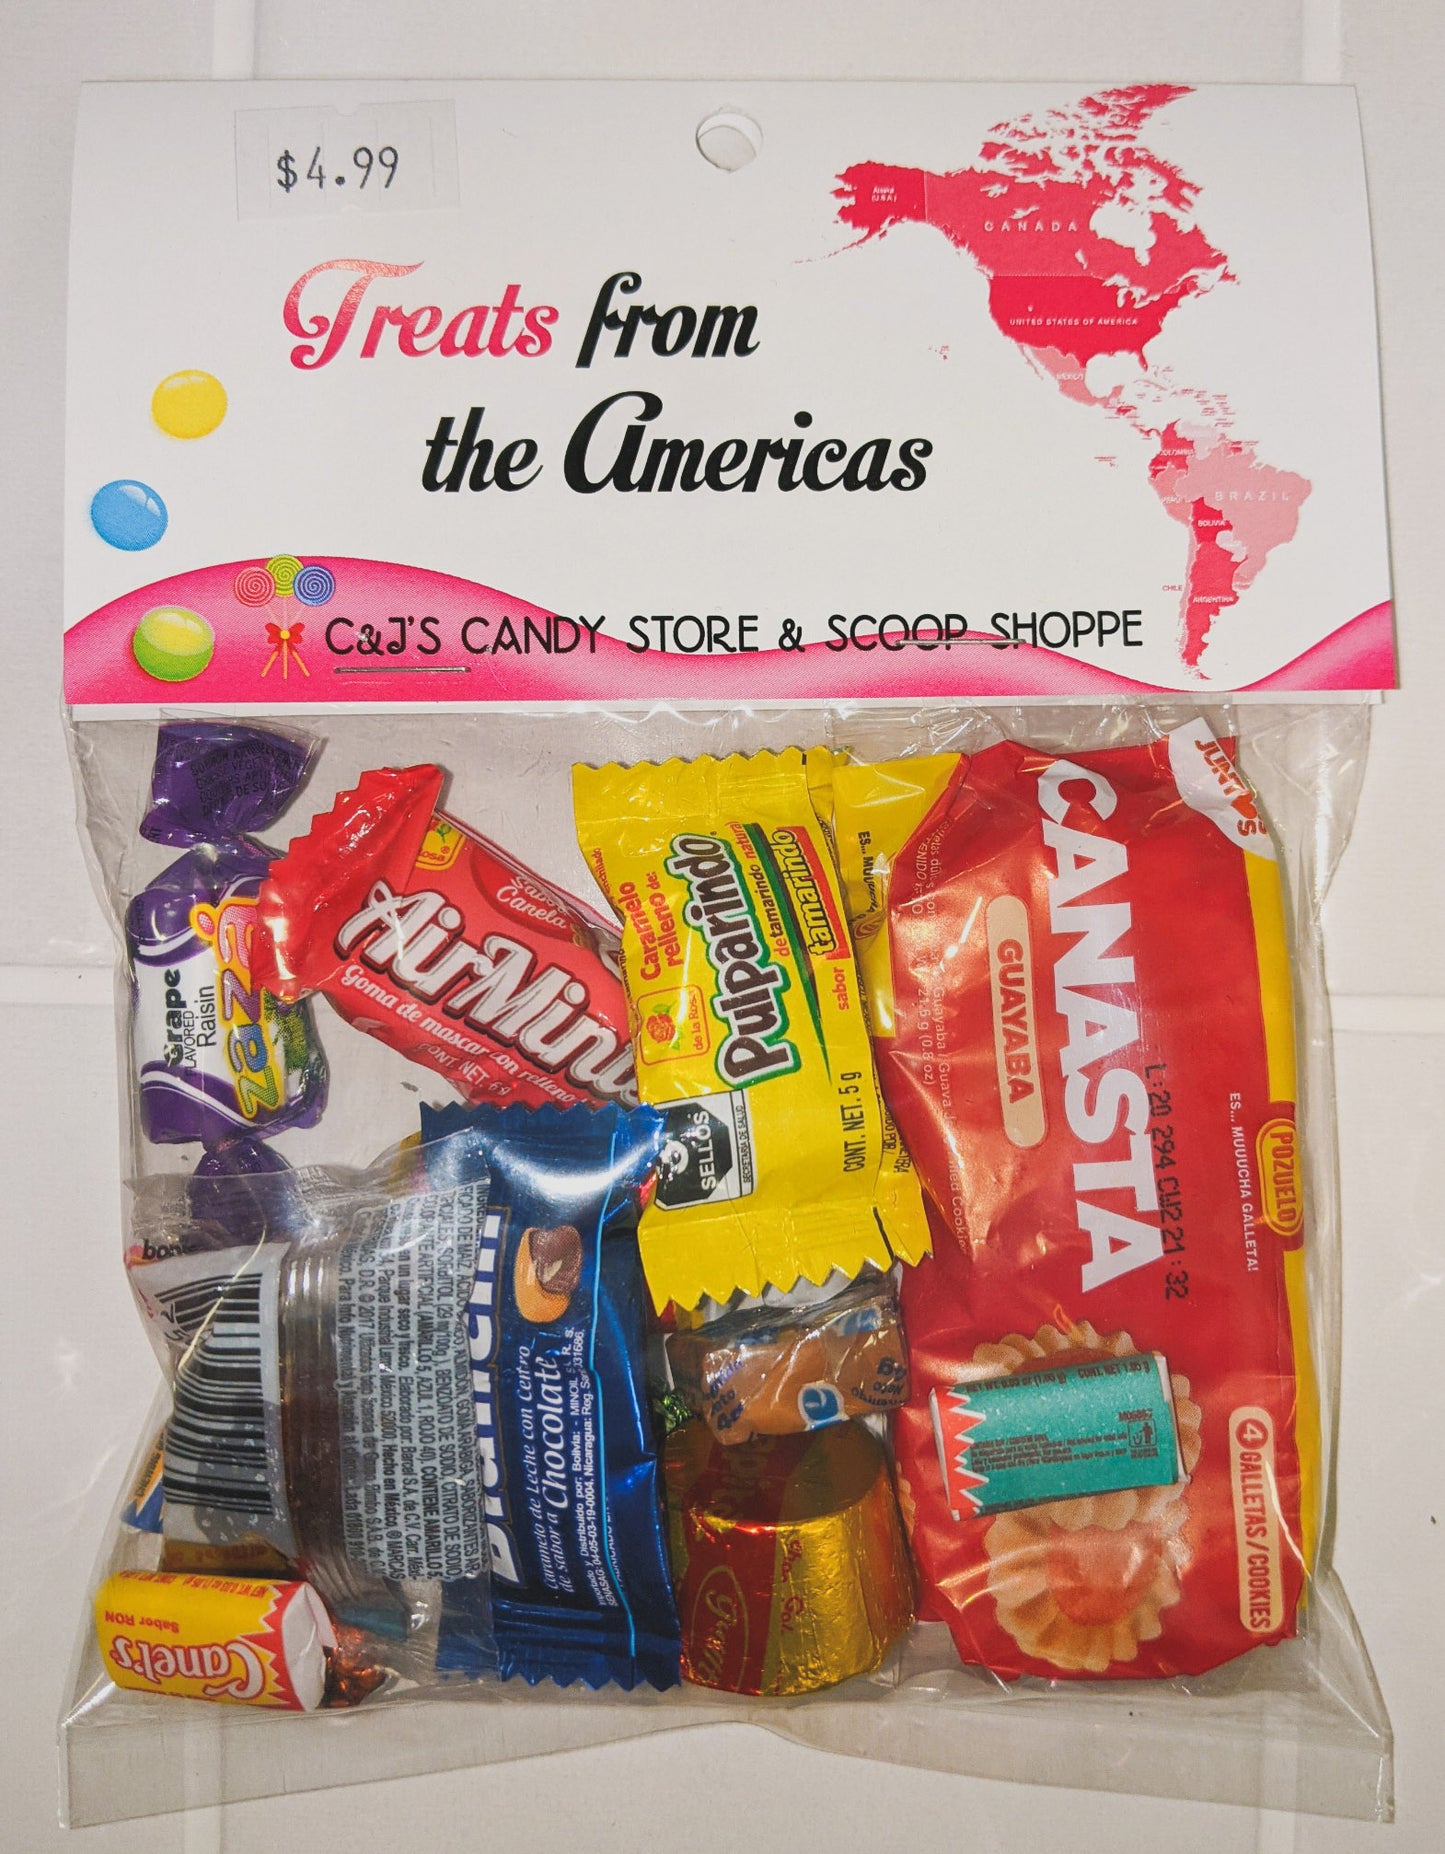 Treats from the Americas